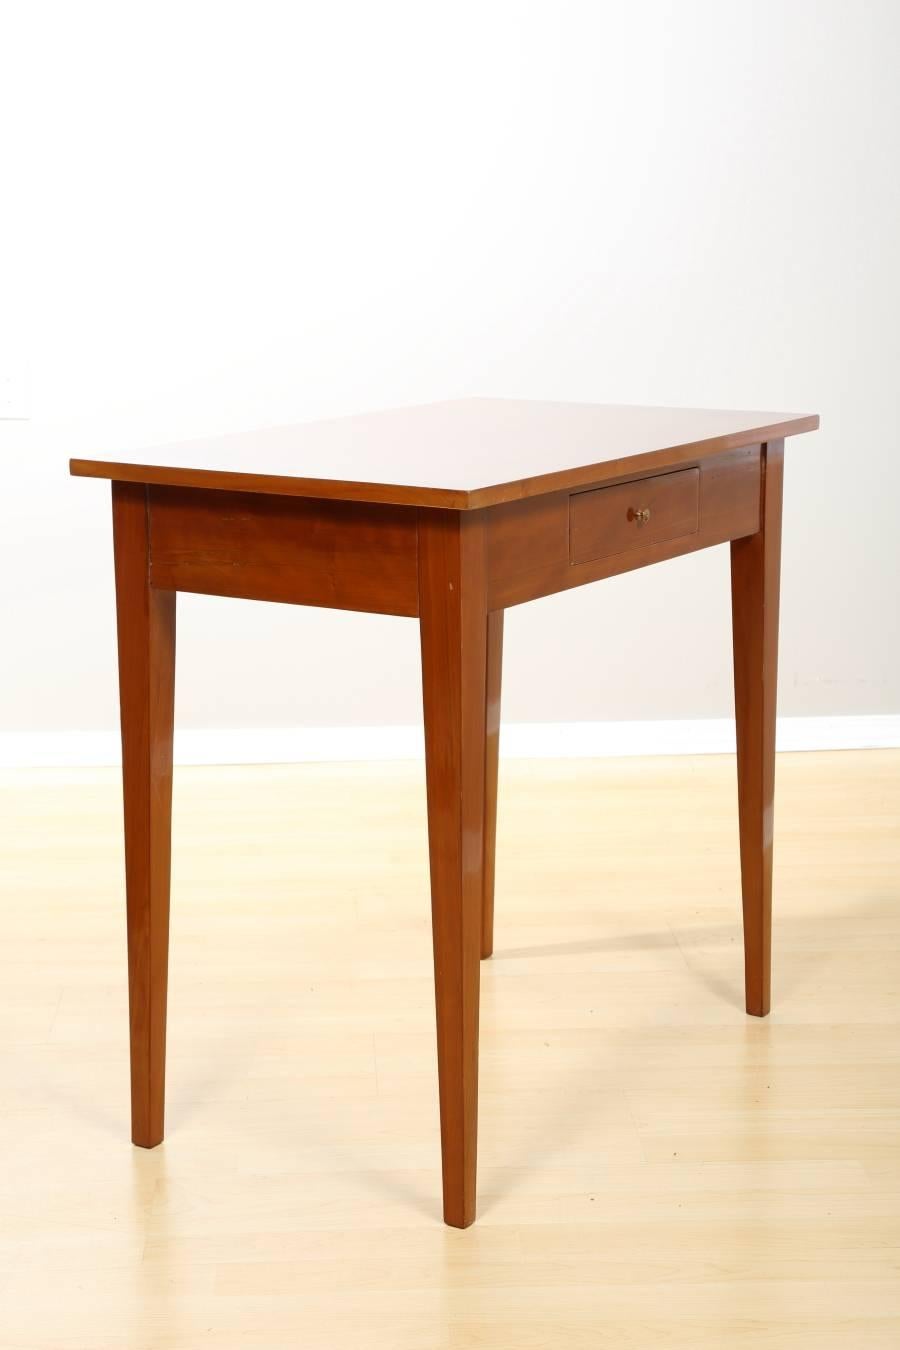 German Biedermeier Cherry Table with Marquetry Details, circa 1840 For Sale